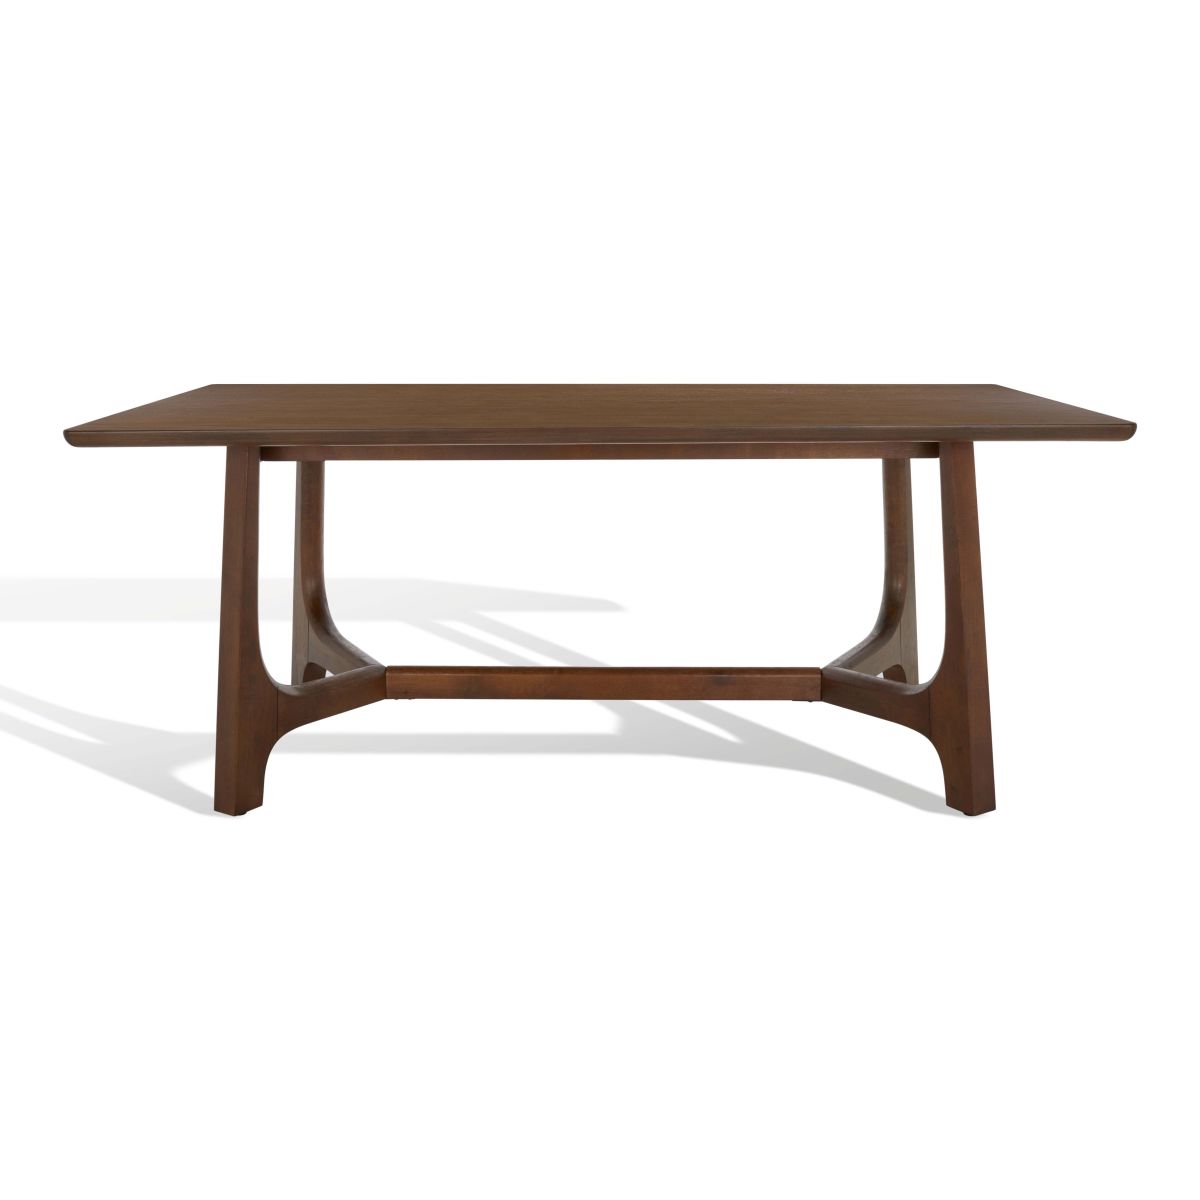 Safavieh Couture Adelee Wood Rectangle Dining Table